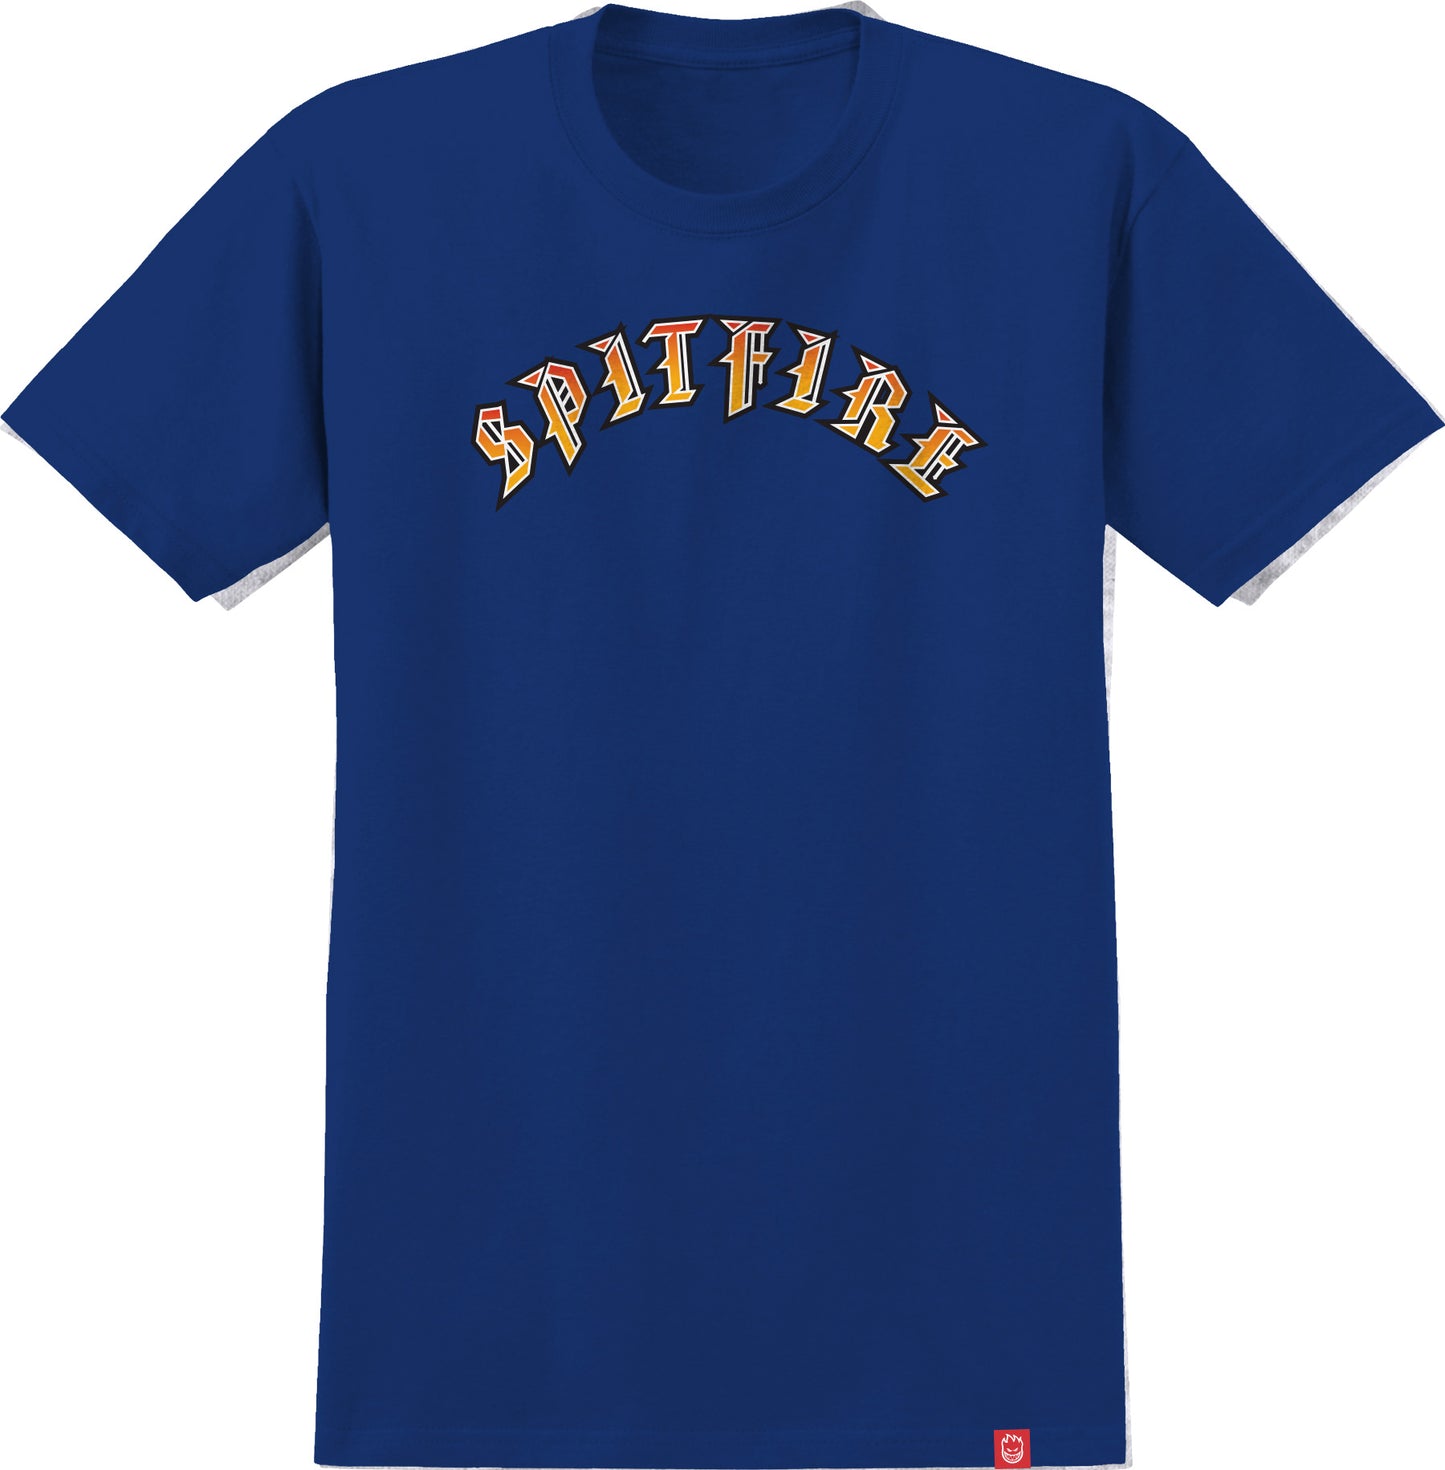 SPITFIRE - OLD E YOUTH TEE - ROYAL BLUE